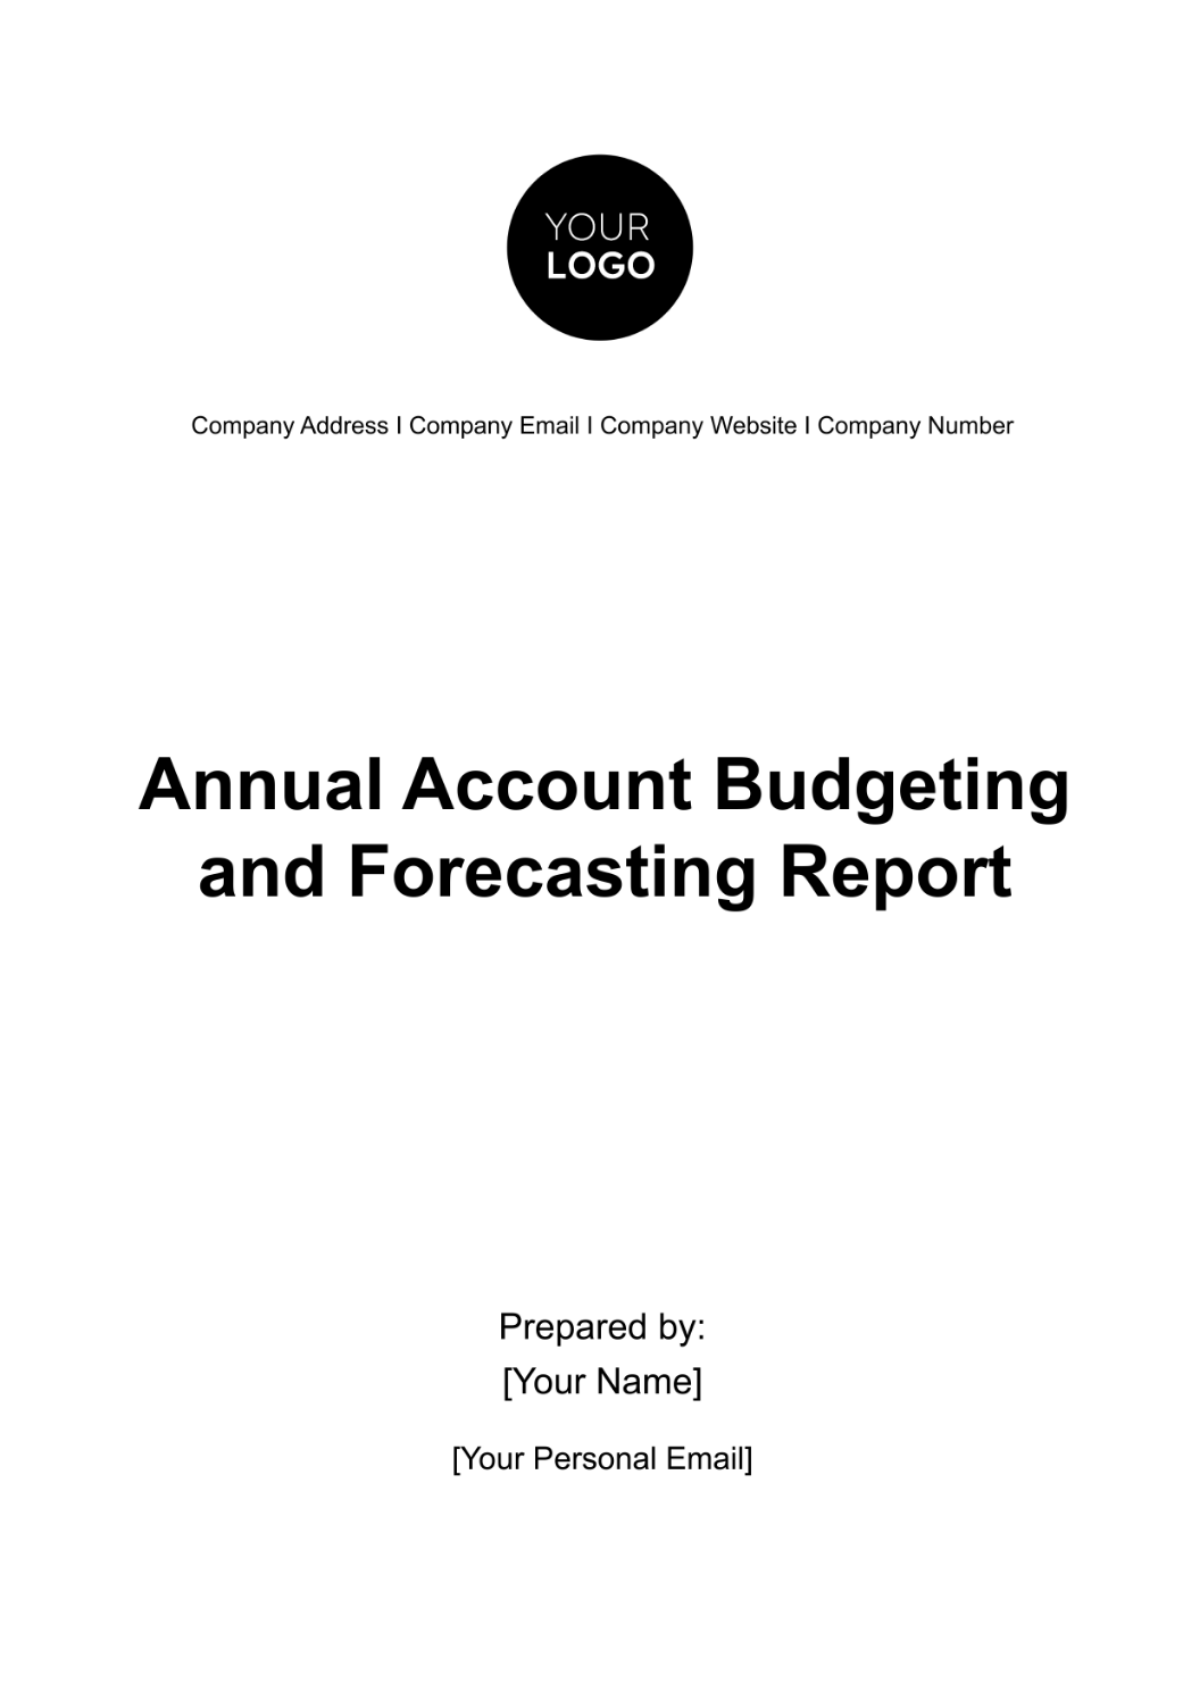 Annual Account Budgeting and Forecasting Report Template